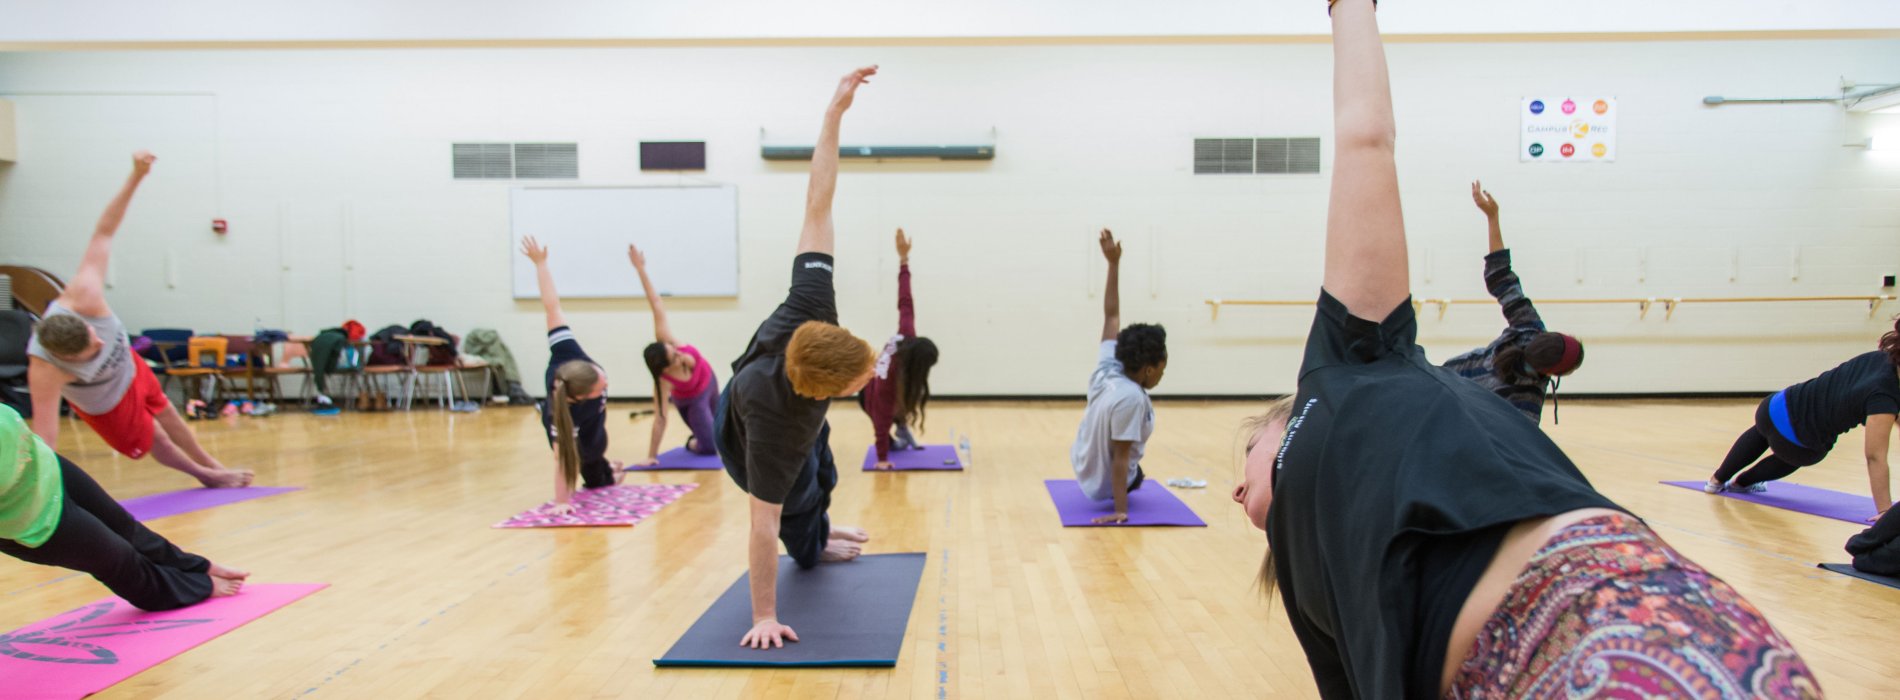 About a dozen students complete a yoga pose inside the Group Exercise Room.